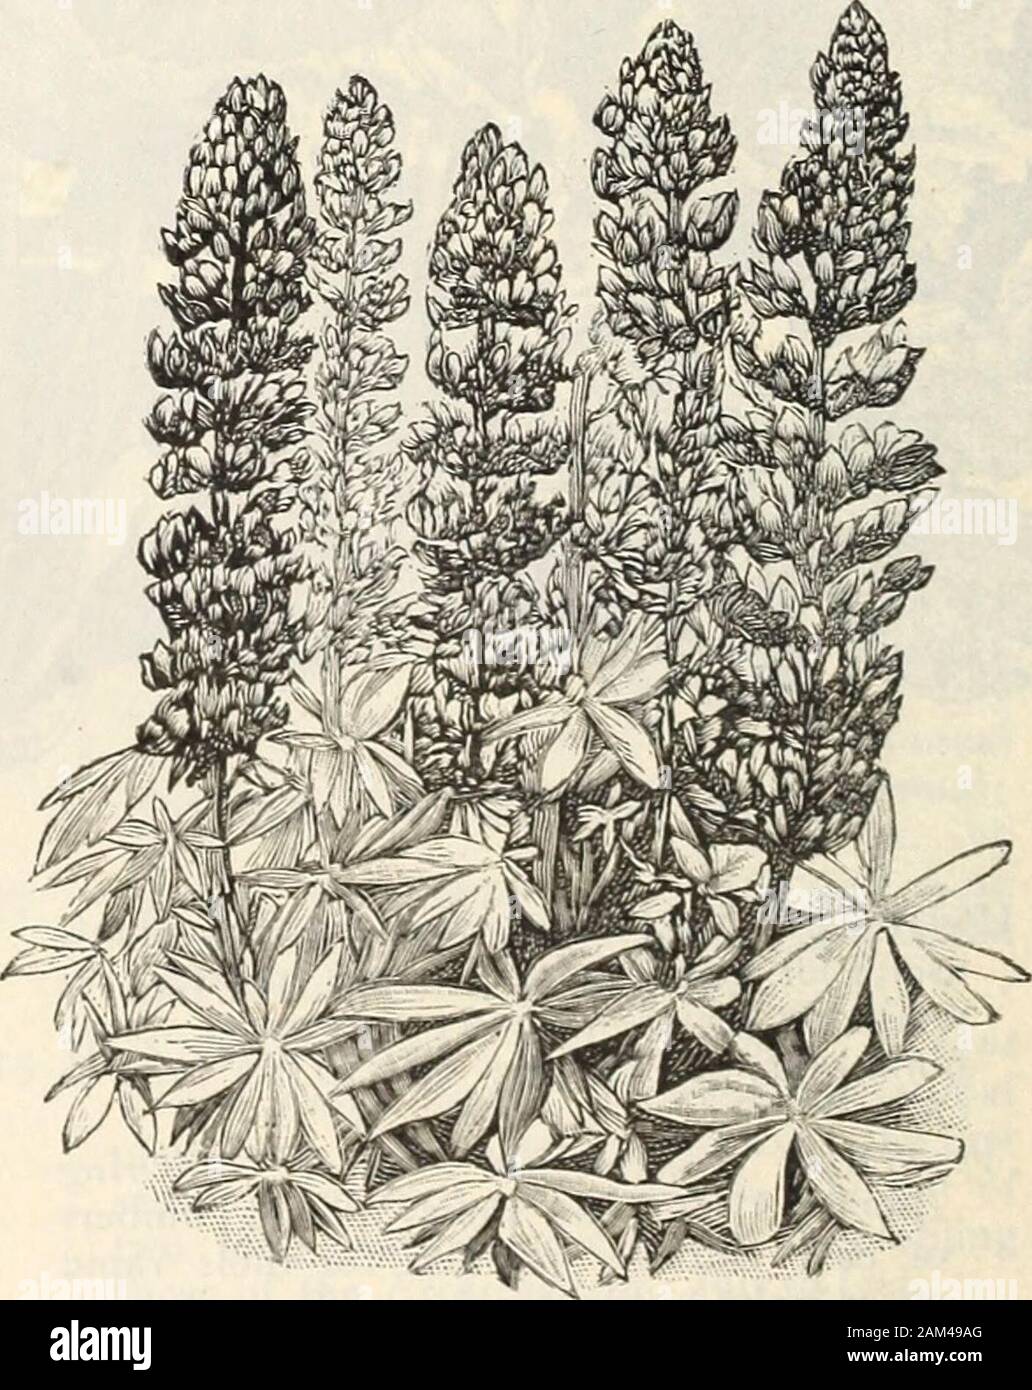 Farquhar's catalogue : spring 1904 . Showy plants of veryeasy cultivation and succeeding in any ordi-nary soil. Annual Varieties Mixed. Including blue,white, pink, and yellow; July to Oct., 2 ft. Oz., .20 .05Cruickshanki. Blue and yellow; 3 ft., an-nual Oz., .30 .05 •05.10.10 .10 •05?OS •05.10 •25.10 10 LIBONIA FLORIBUNDA. Splendid plant forhouse or conservatory decoration duringwinter; flowers scarlet and yellow; tube-shaped; ih ft LINUM FLAVUM. Golden Flax. Hardy per-ennial with golden-yellow flowers, bloomingfreely from June to September ; 1 ft. .GRANDIFLORUM RUBRUM. Scarlet Flax.Brilliant Stock Photo